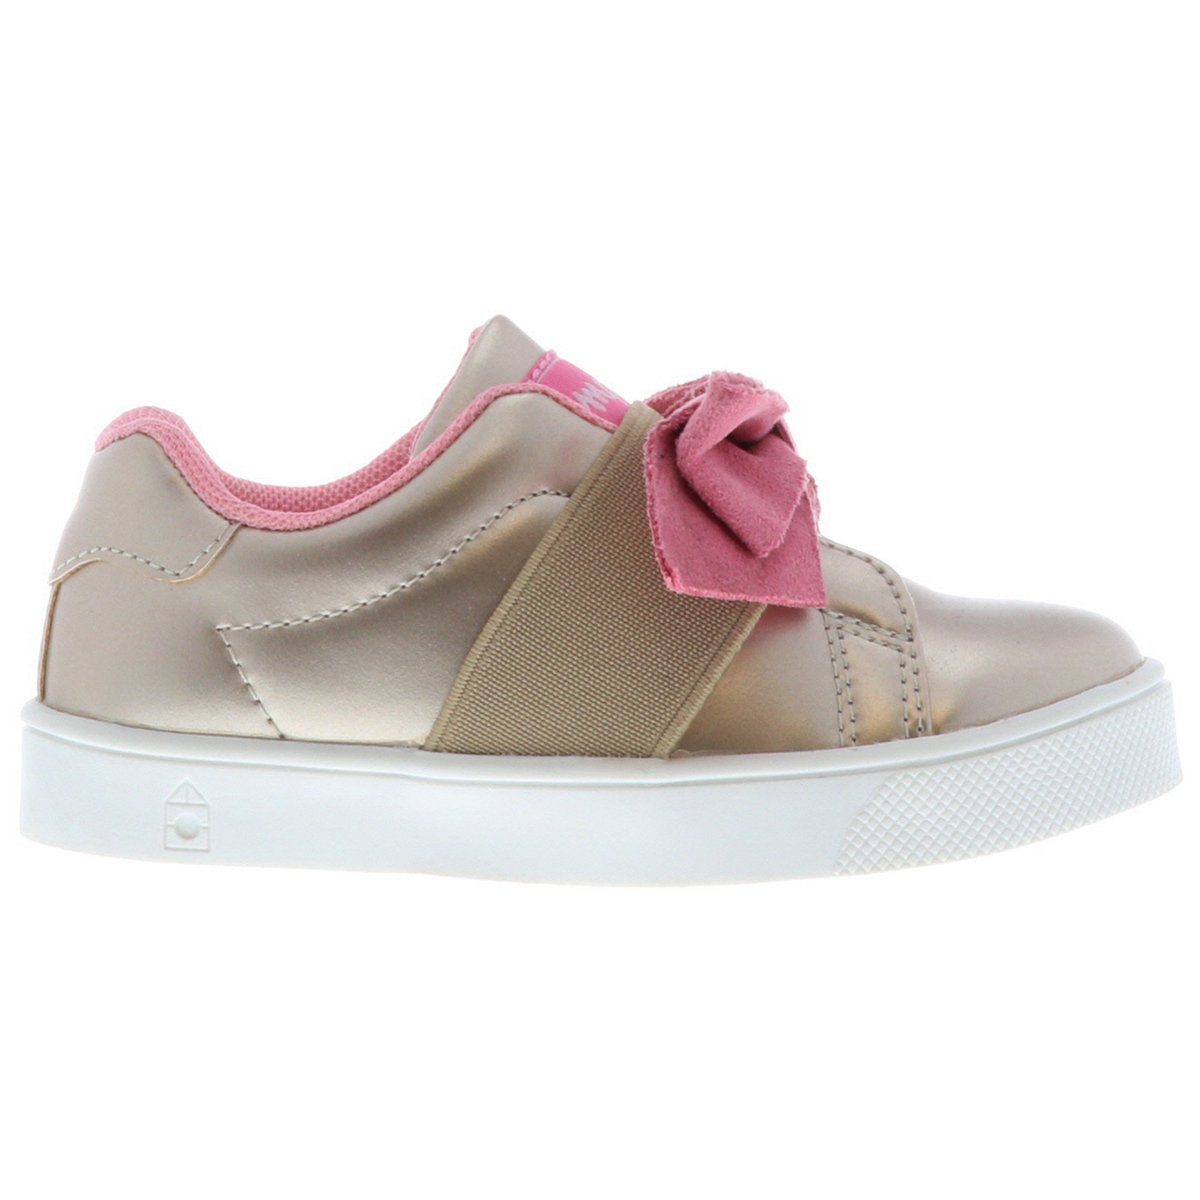 Oomphies Lily Shoe